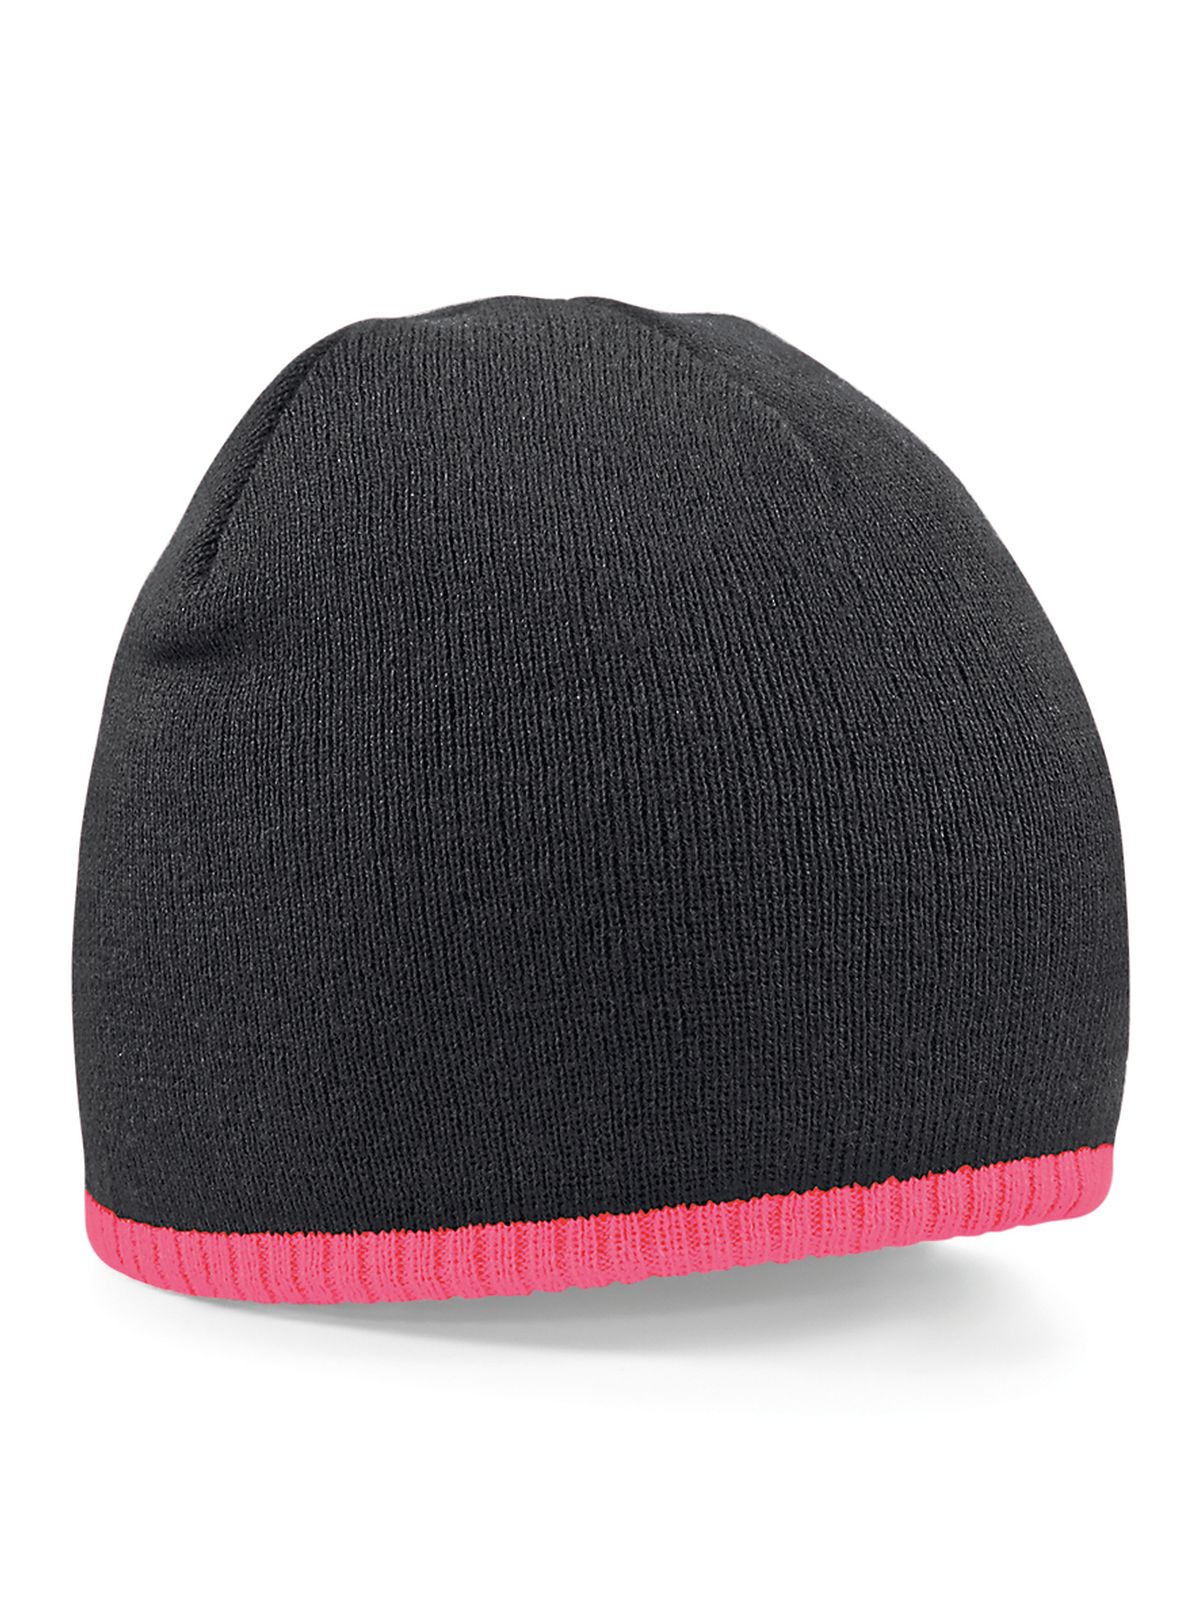 two-tone-pull-on-beanie-black-fluorescent-pink.webp